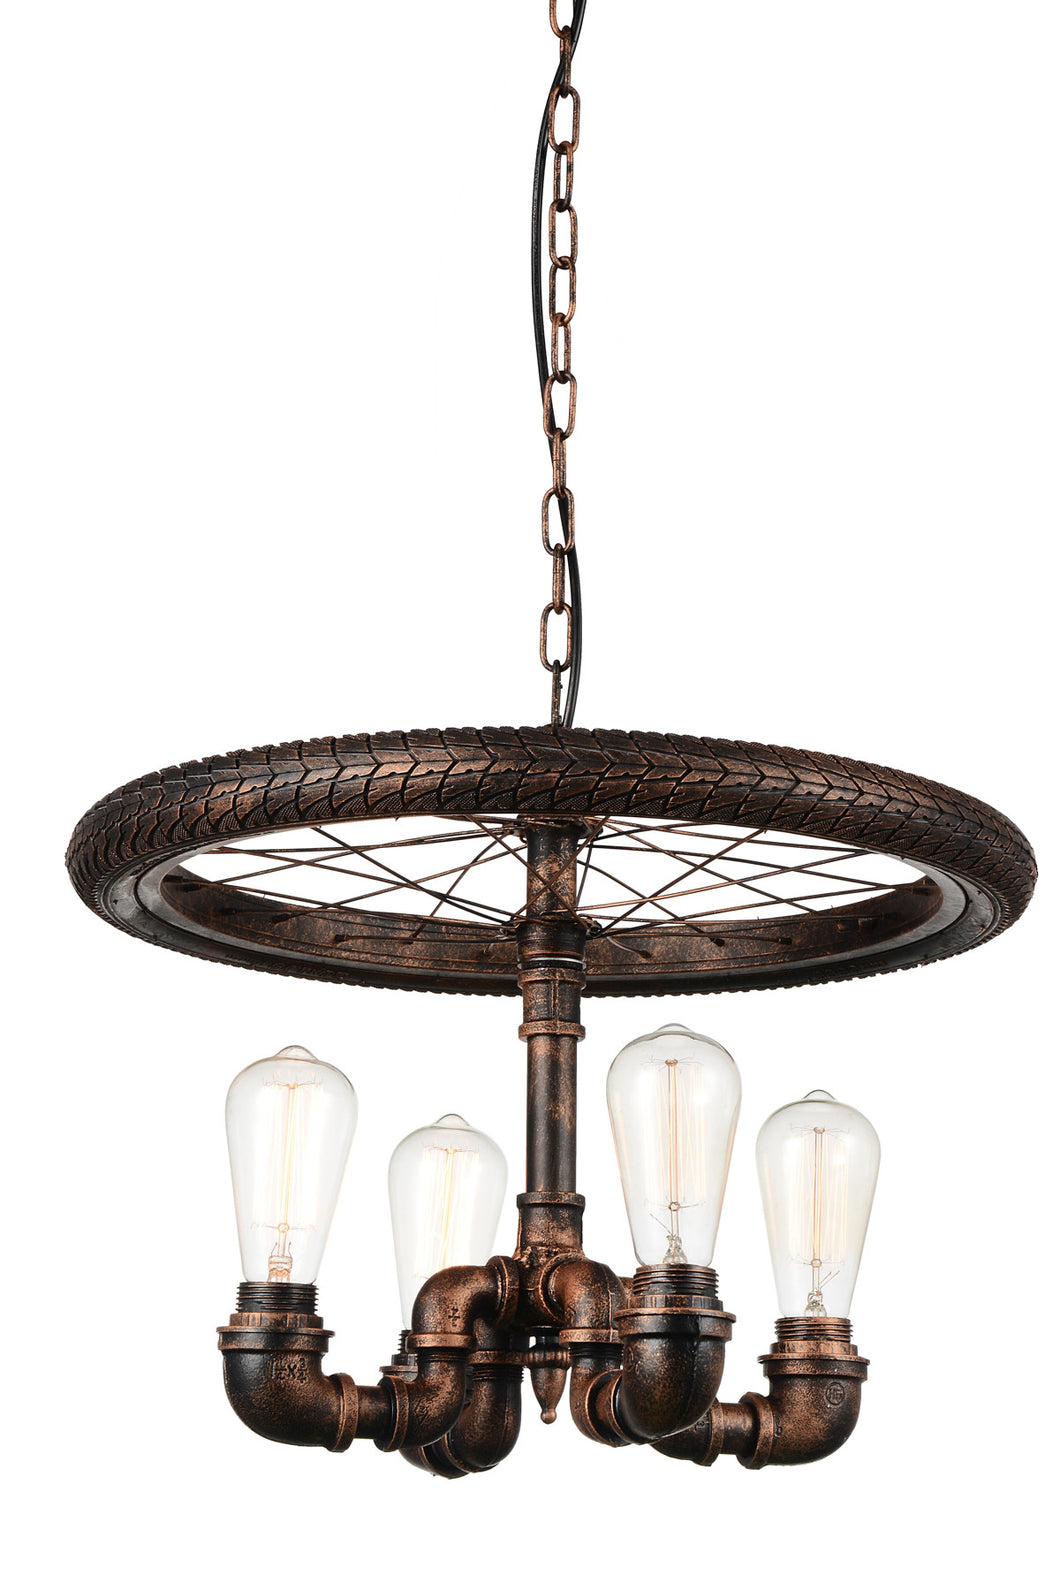 4 Light Up Chandelier with Blackened Copper finish